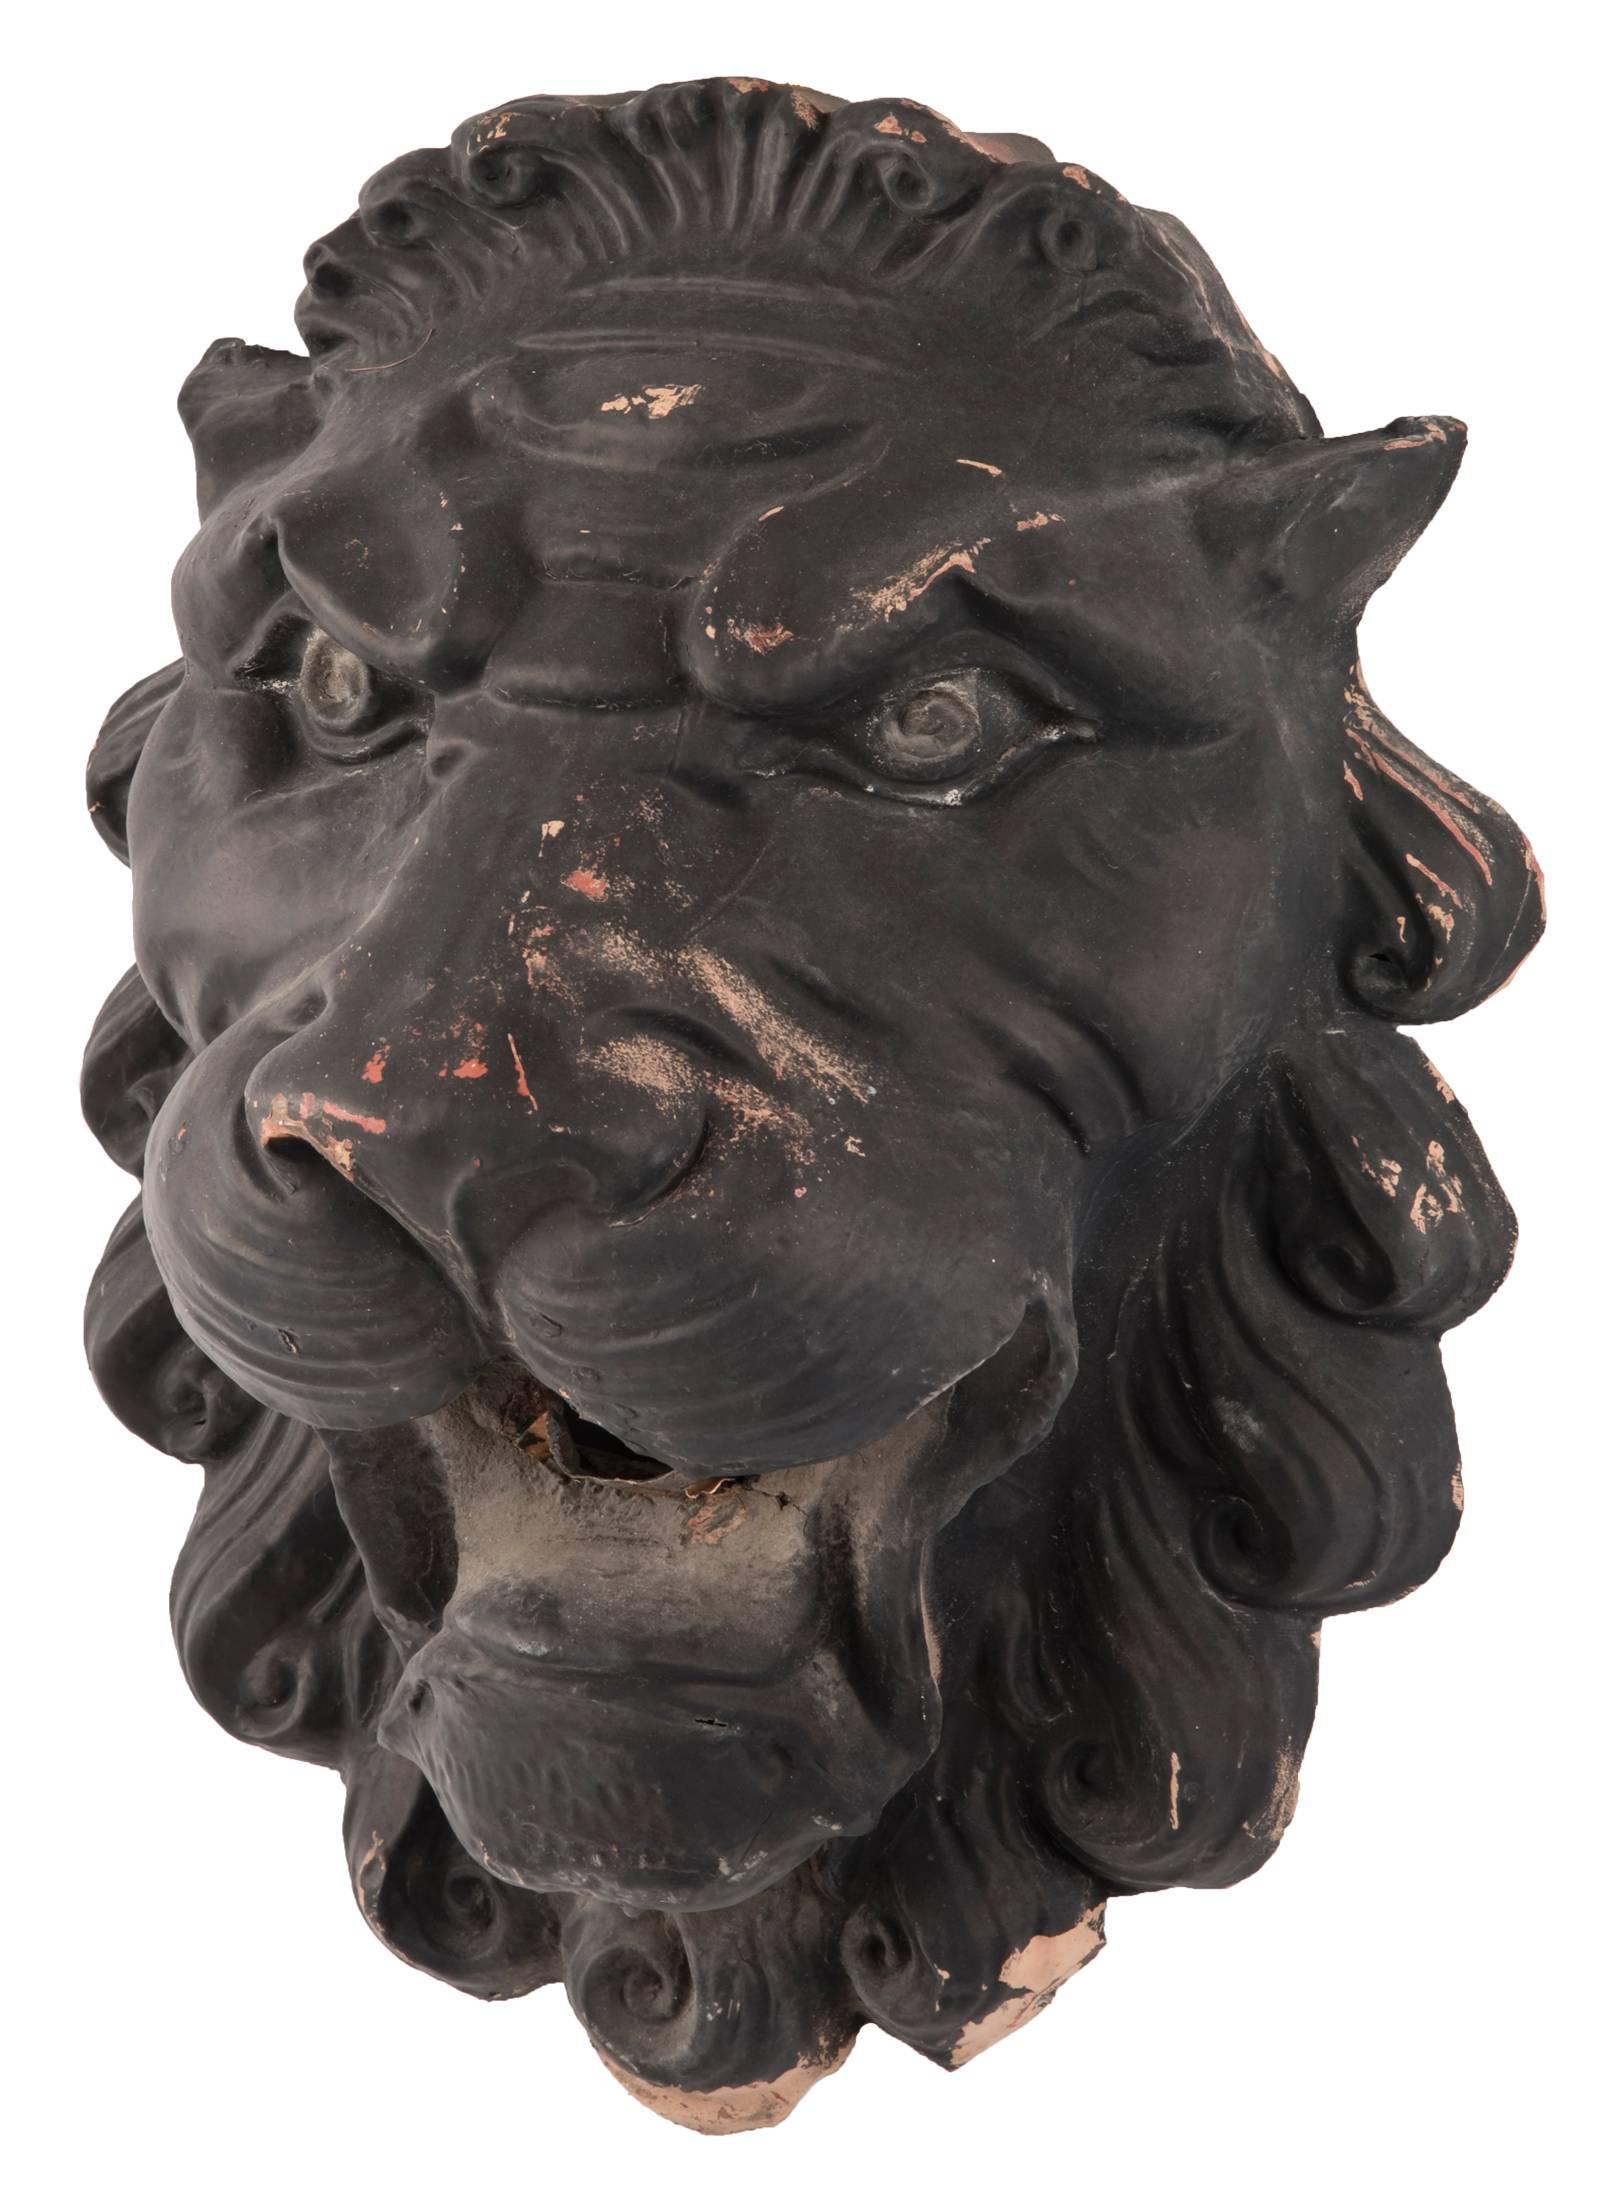 A pair of lion heads in stamped copper with stylized curled mane, pointed ears, and a menacing stare expressed in their eyes. Originally the pair held a chain used to hold an awning along the side of a historical building in Downtown Salt Lake City,